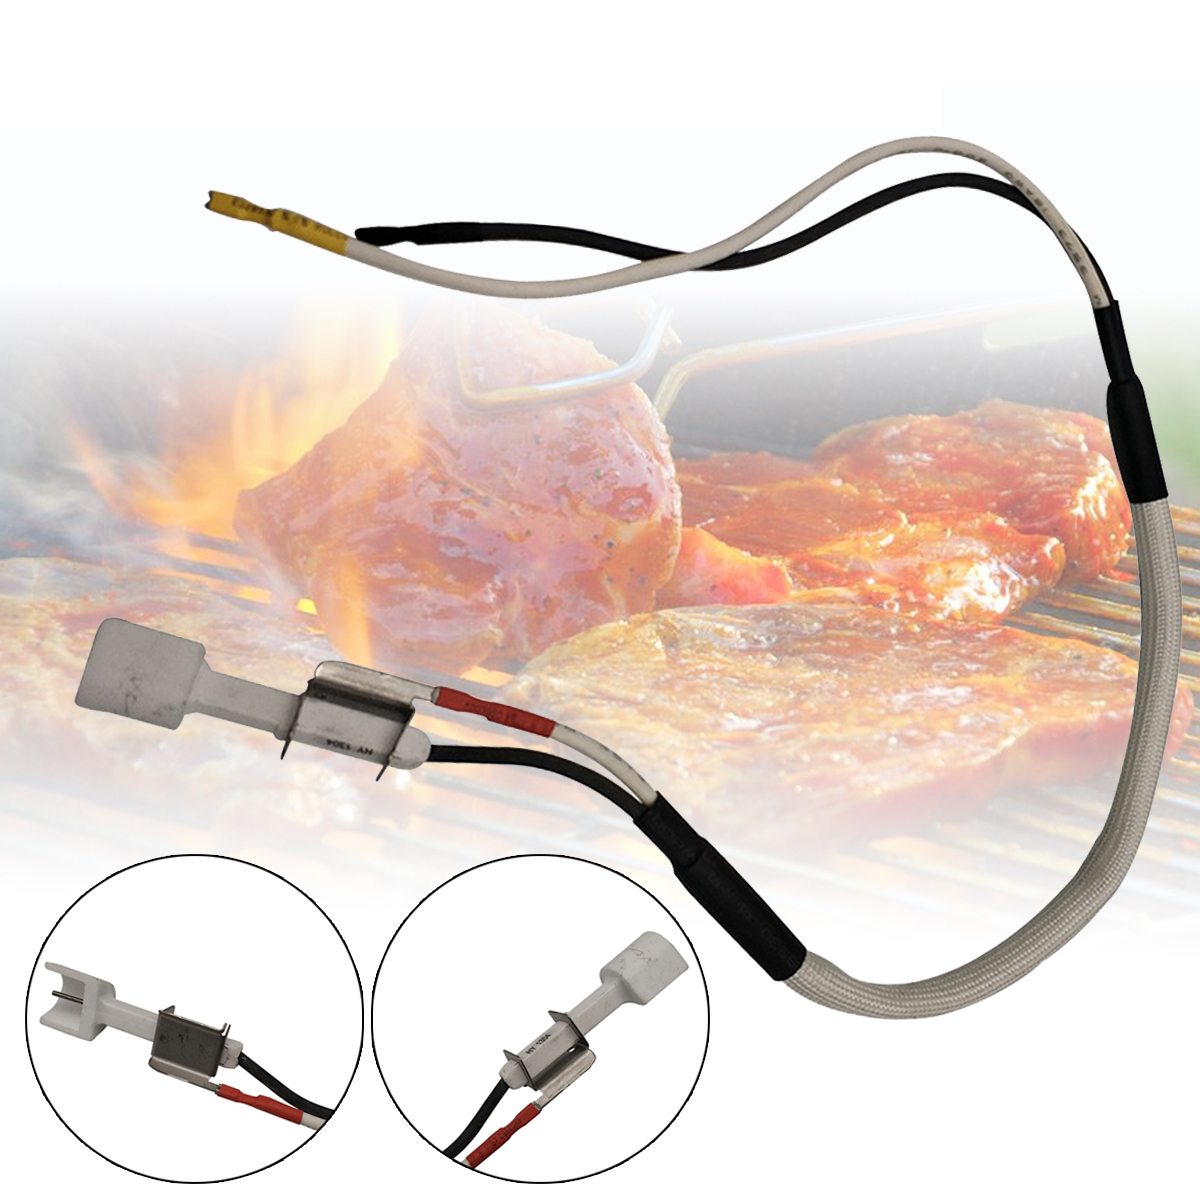 

1 Pcs Outdoor BBQ Barbecue Electronic Ceremic Igniter Accessory Cooking Stove Kit For Weber